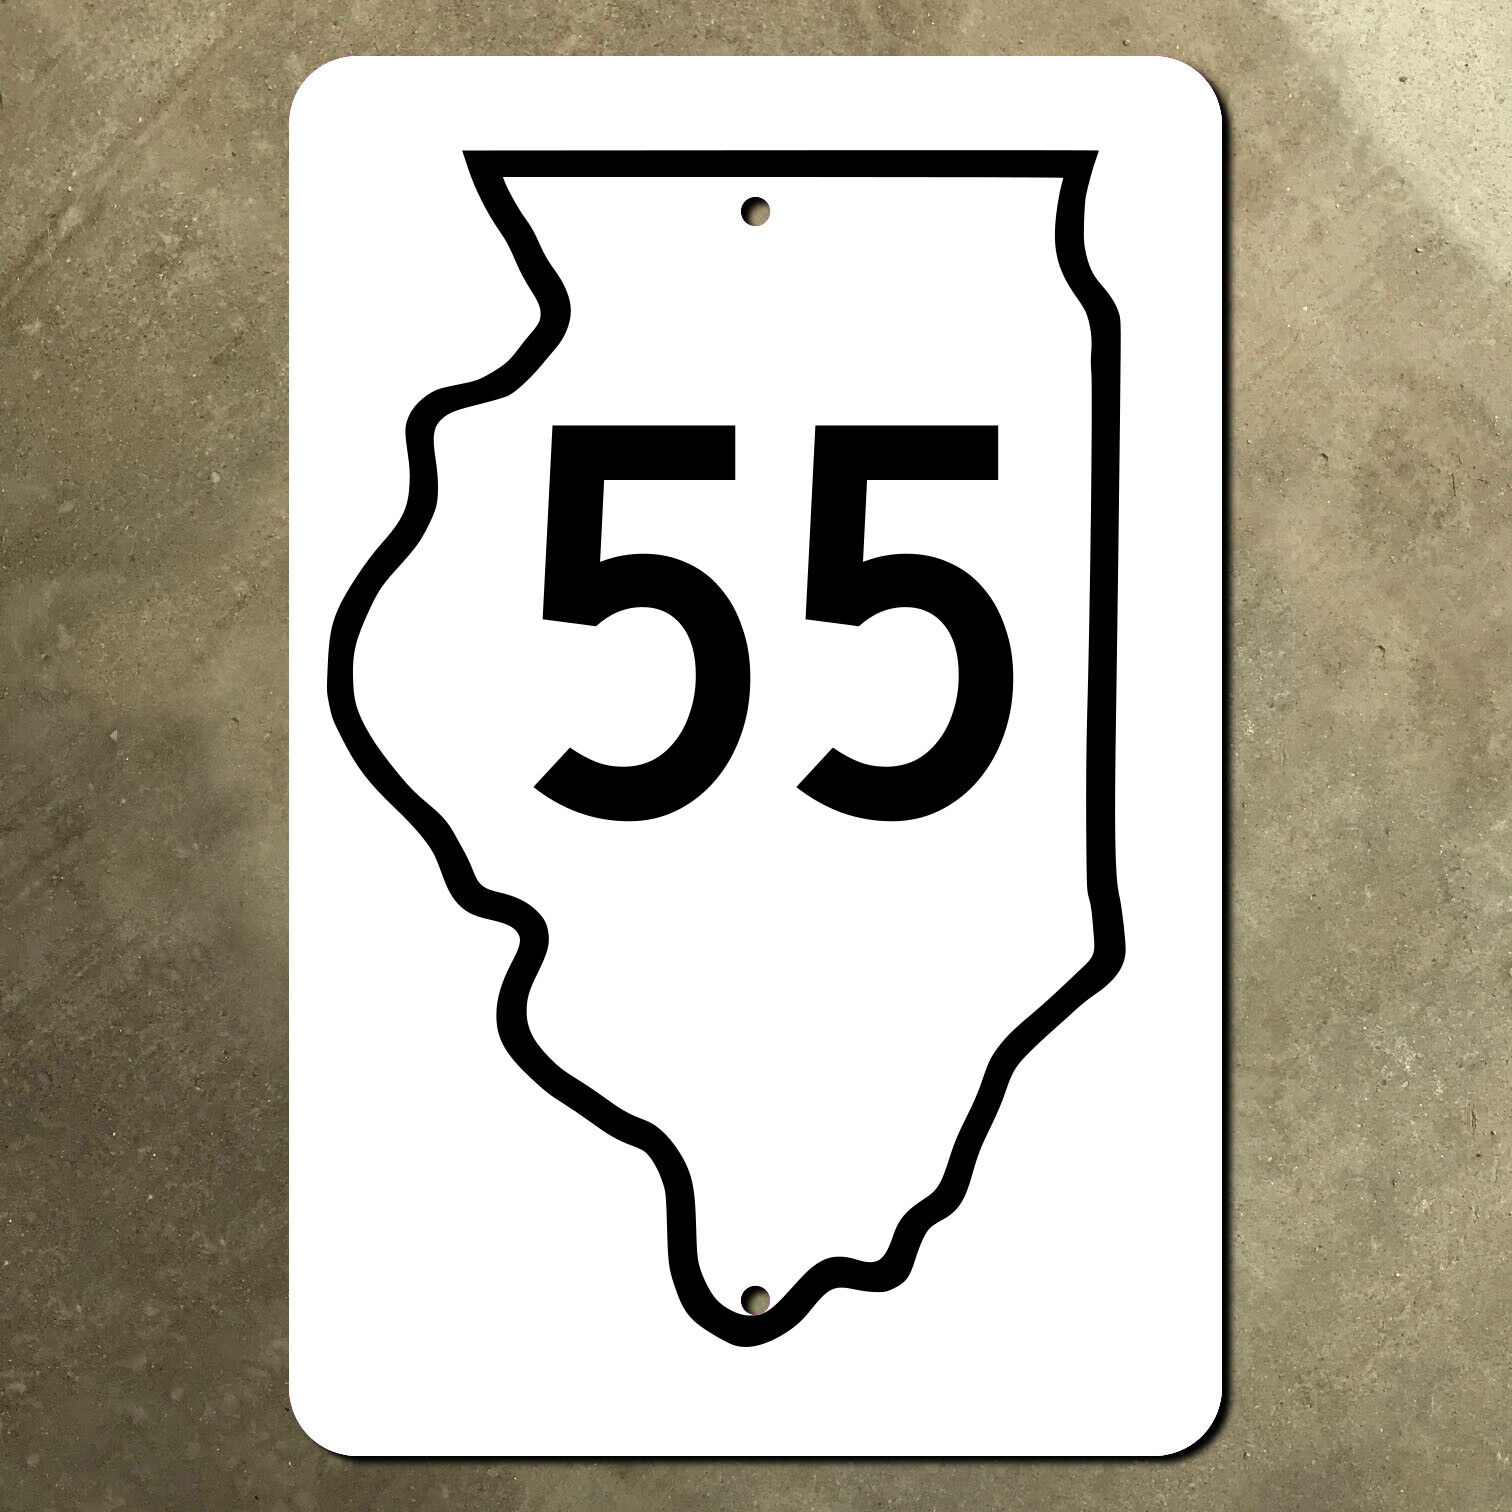 Illinois state route 55 highway marker road sign Chicago Oak Brook 1948